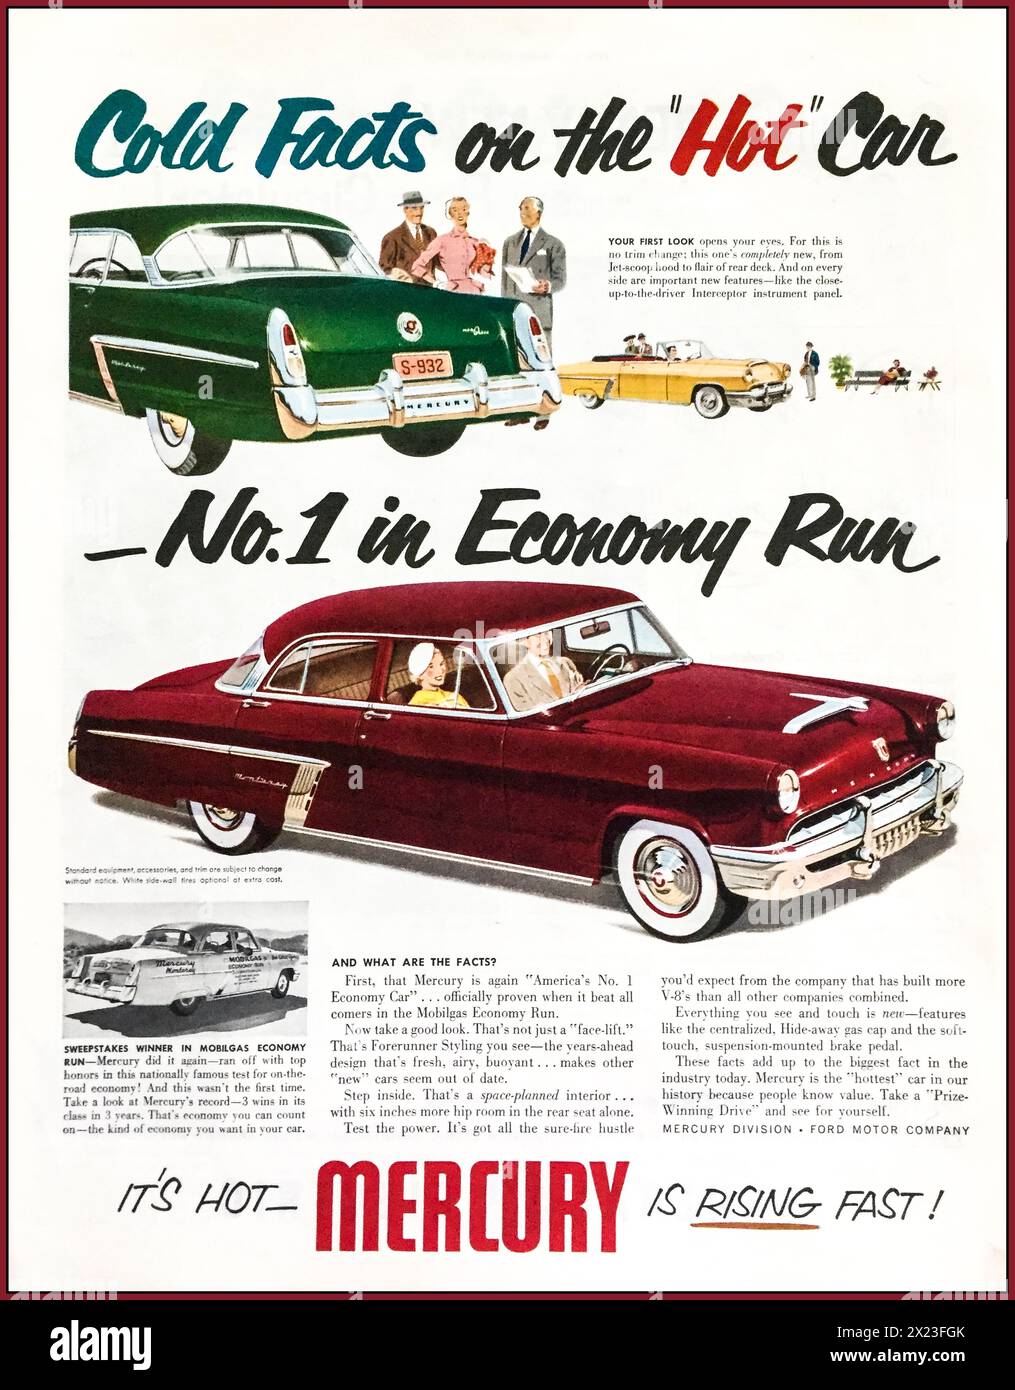 1952 Mercury American Automobile car Press advertisement 'No 1 in Economy Run' 'Its hot MERCURY is rising fast' America Americana USA American post war car production part of FORD Motor company group. USA 1950s Stock Photo